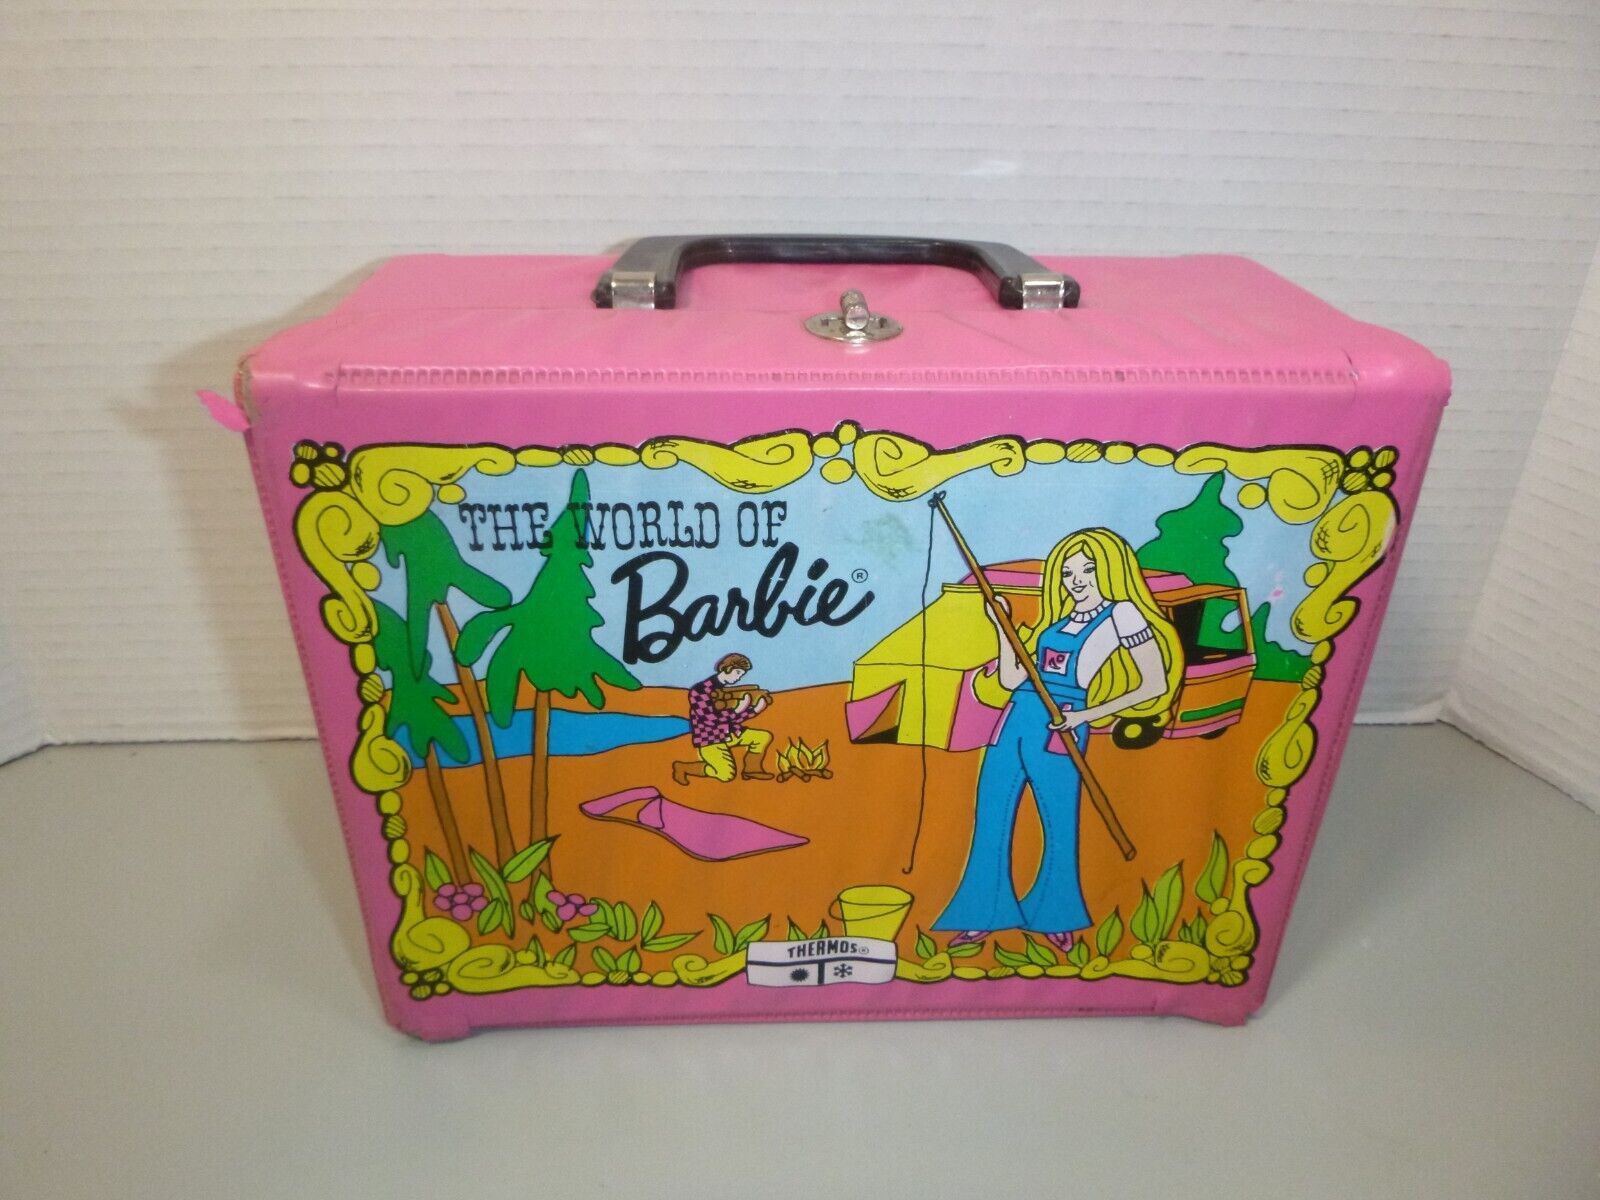 Vintage 1972 Mattel The World Of Barbie Vinyl Lunch Box by King Seeley